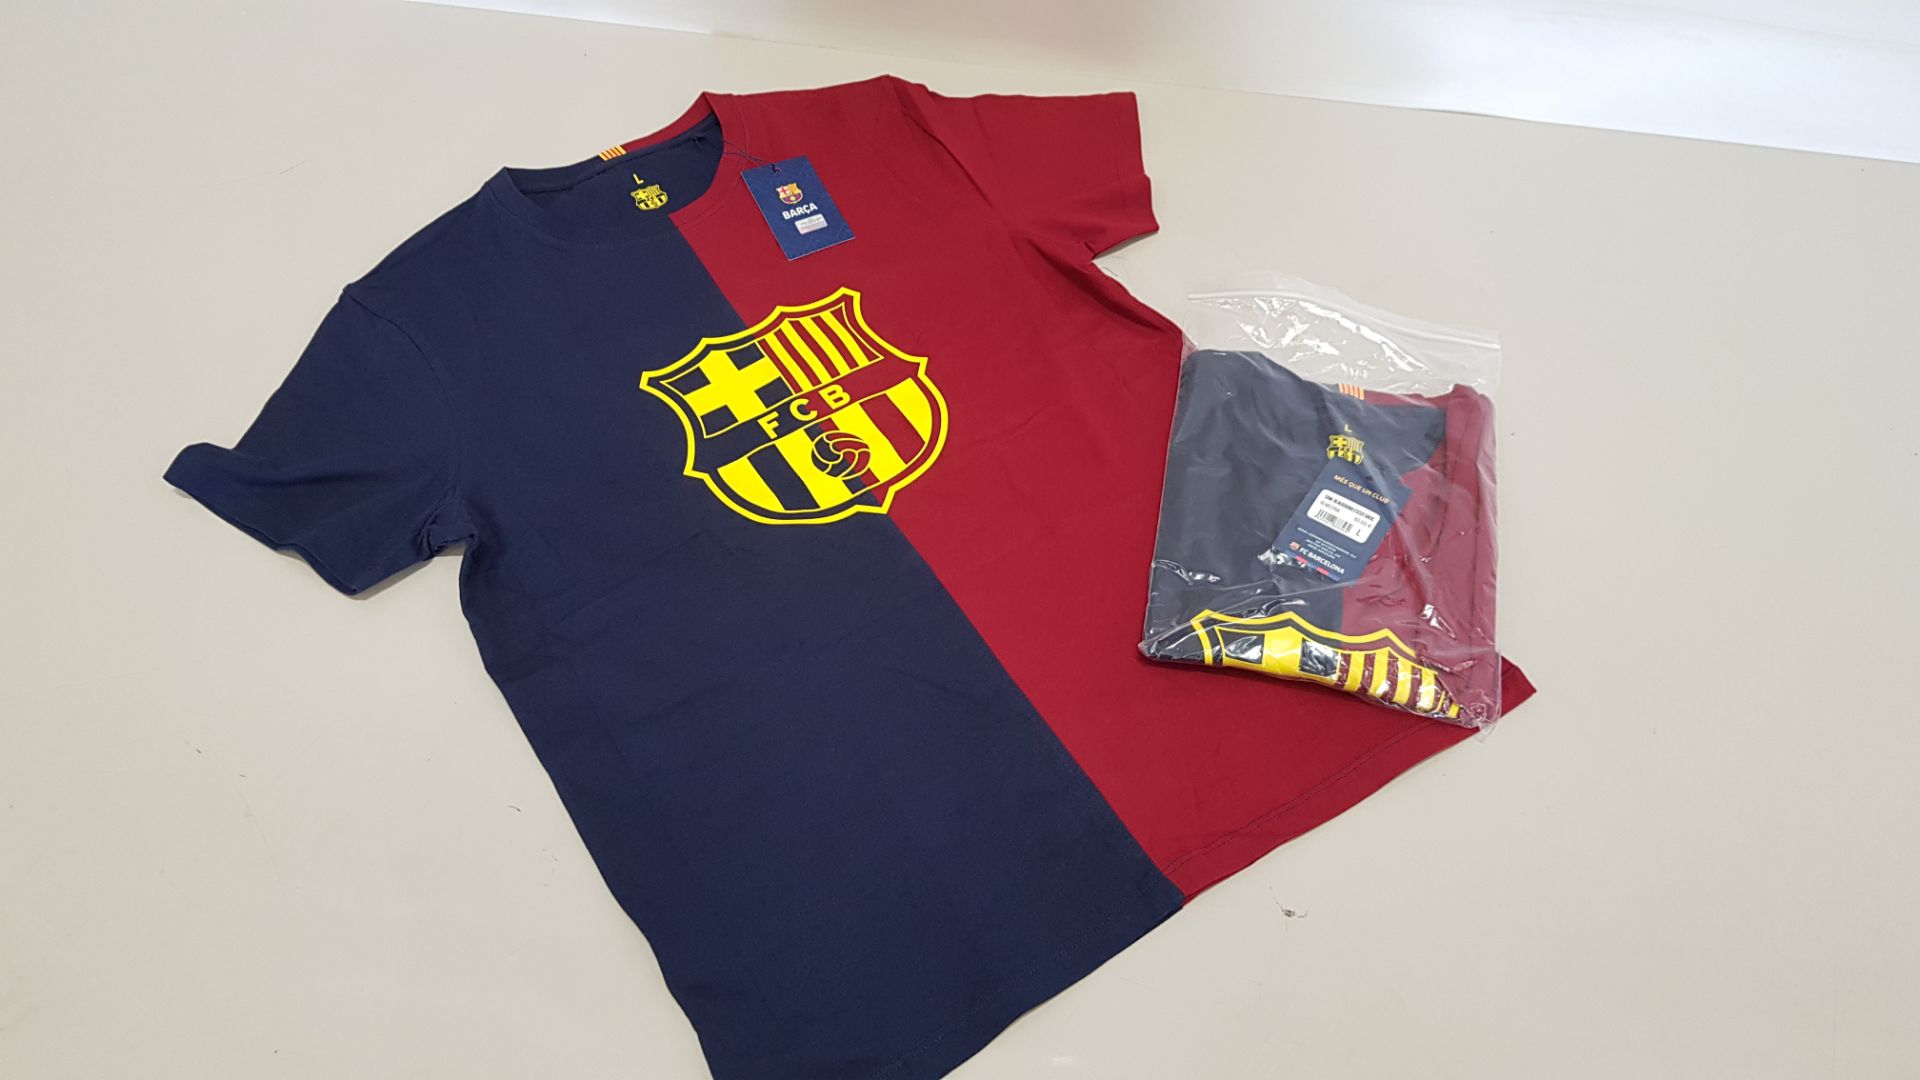 25 X BRAND NEW FC BARCELONA NAVY AND BURGUNDY SHORT SLEEVED T SHIRTS SIZE LARGE